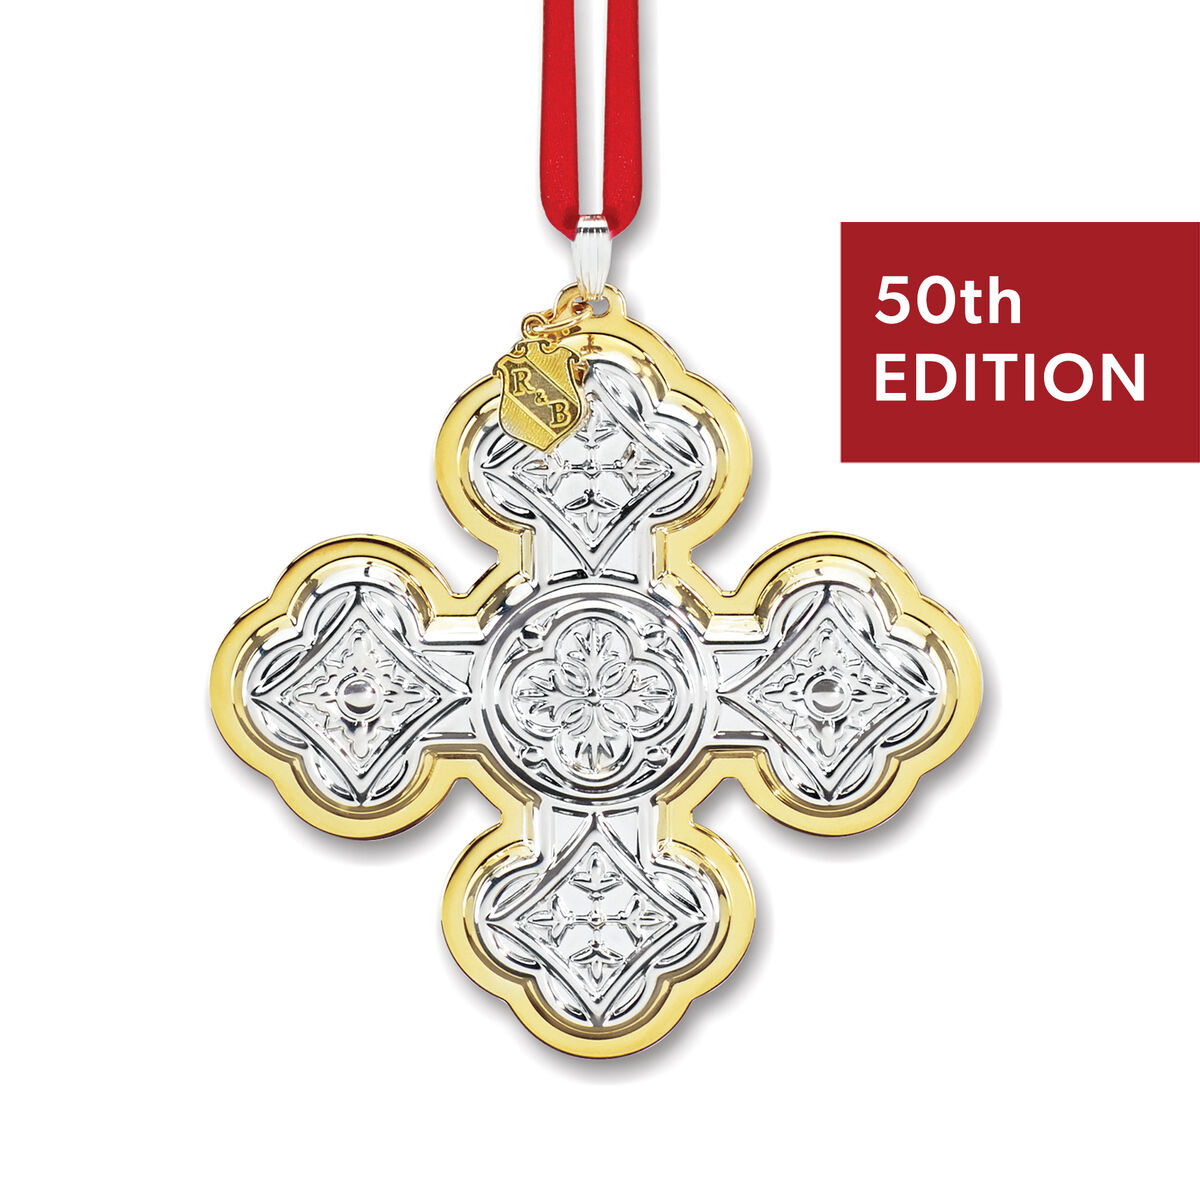 reed and barton christmas cross 2020 Reed Barton 2020 Annual Sterling Silver Christmas Cross Ornament 50th Edition Ross Simons reed and barton christmas cross 2020